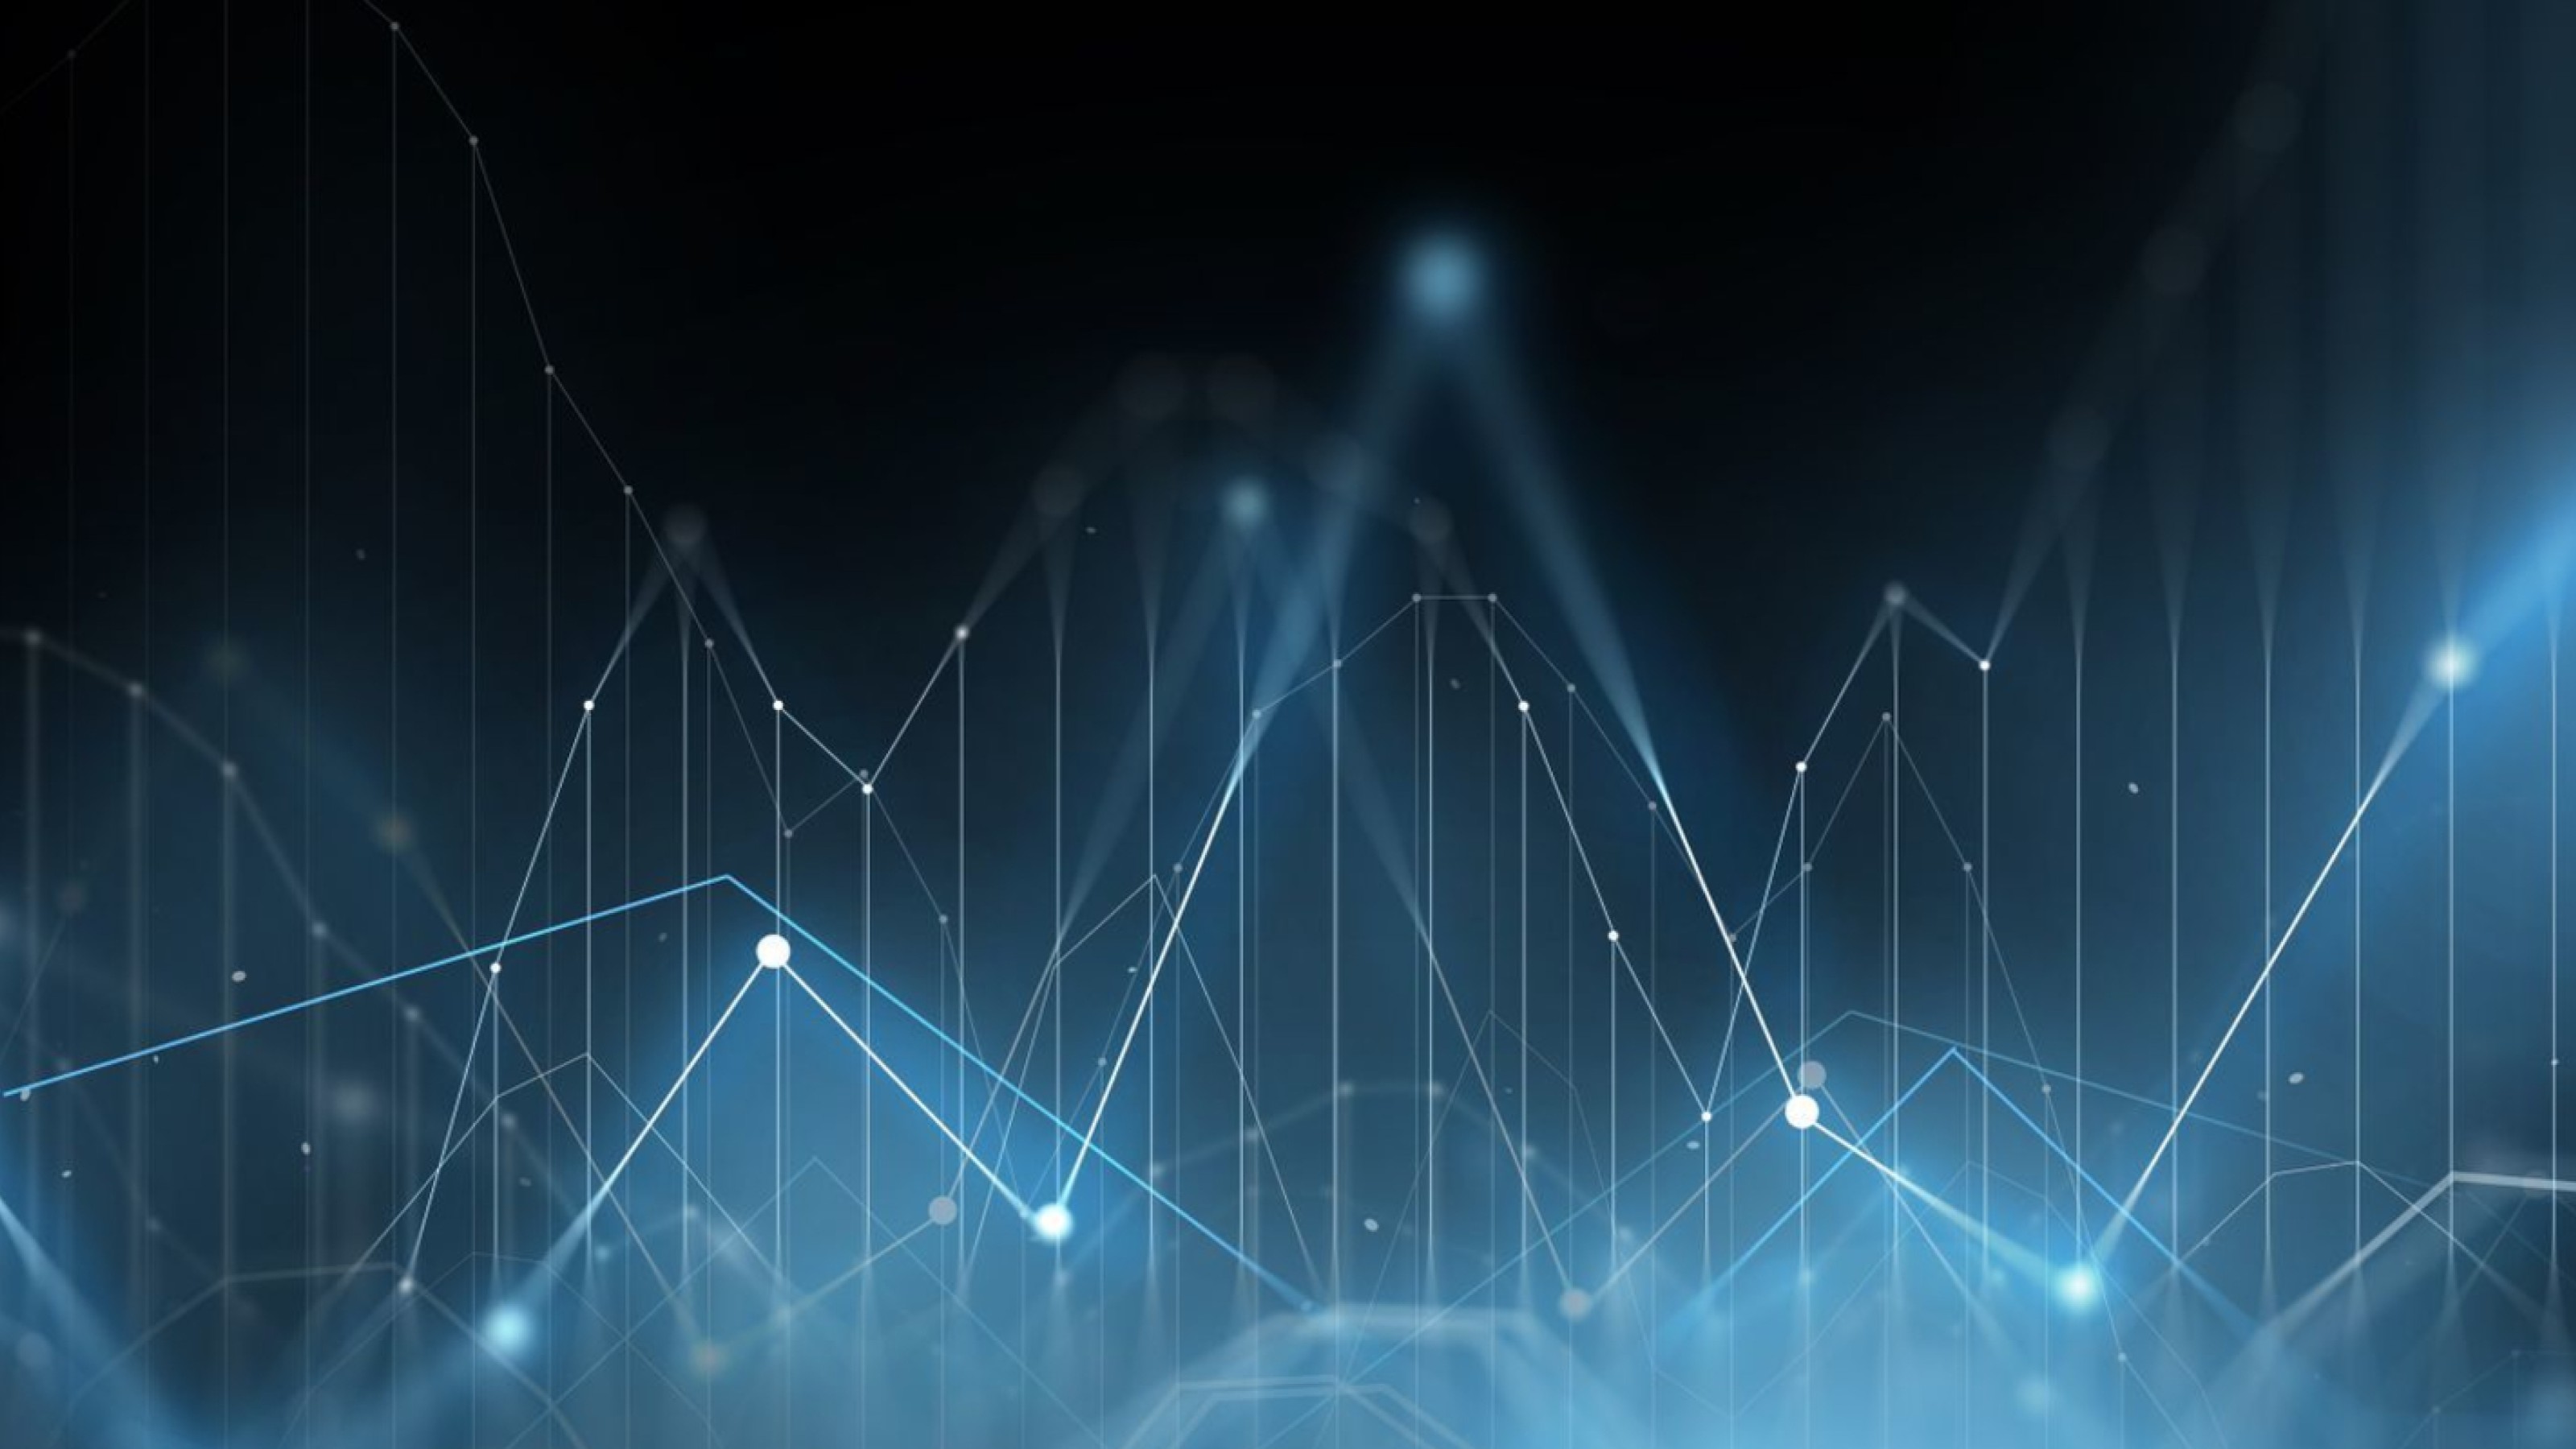 Abstract CG image of graph lines on dark blue background